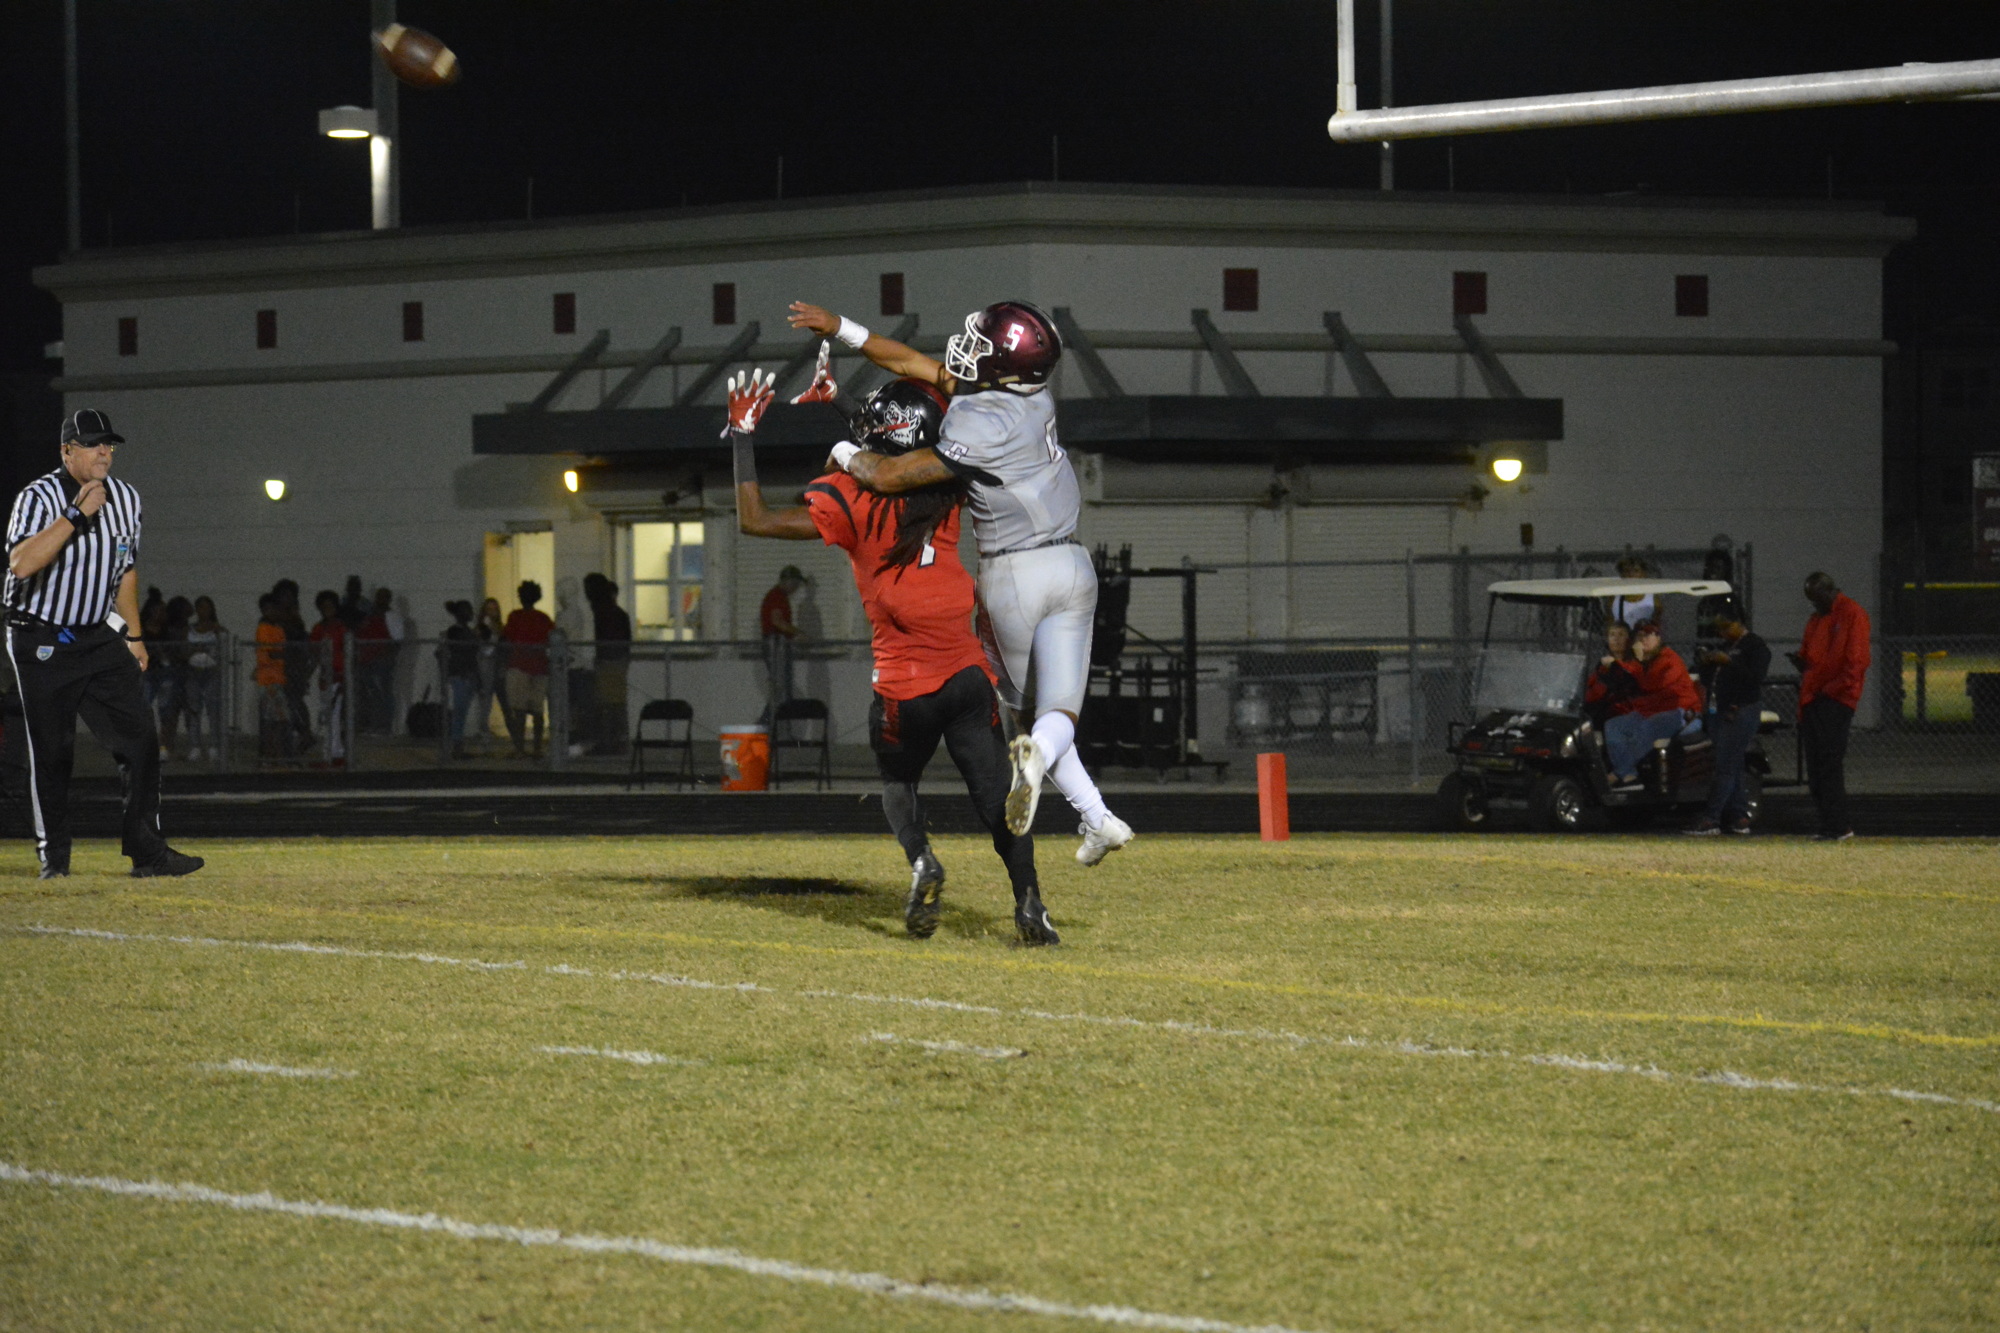 Senior defensive back Tyrone Collins sticks to a South Fort Myers receiver and breaks up a pass. Collins missed the first game against Venice this season while recovering from a torn ACL.